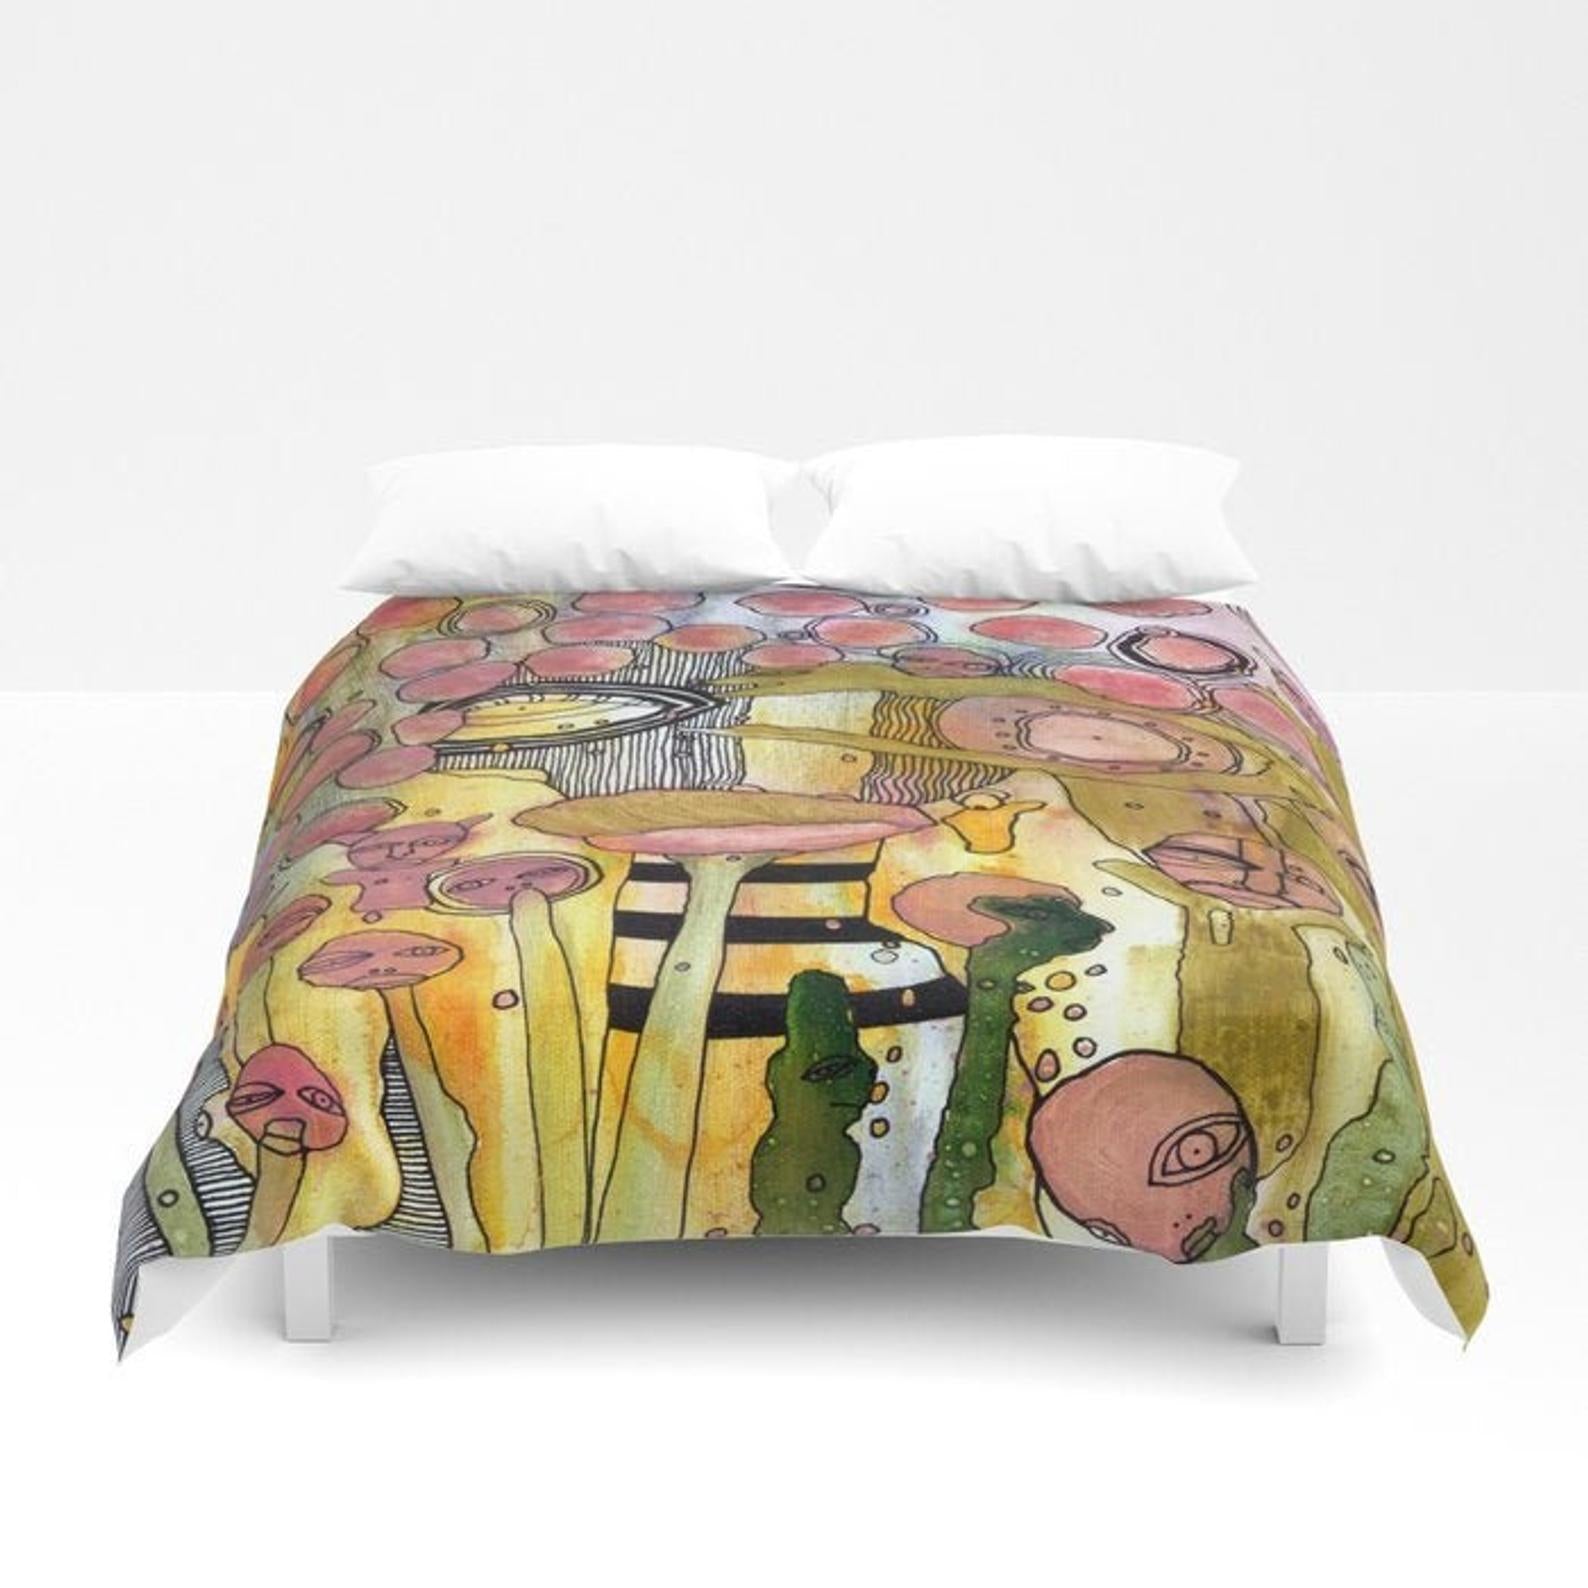 Duvet Cover 'Bugged Out'